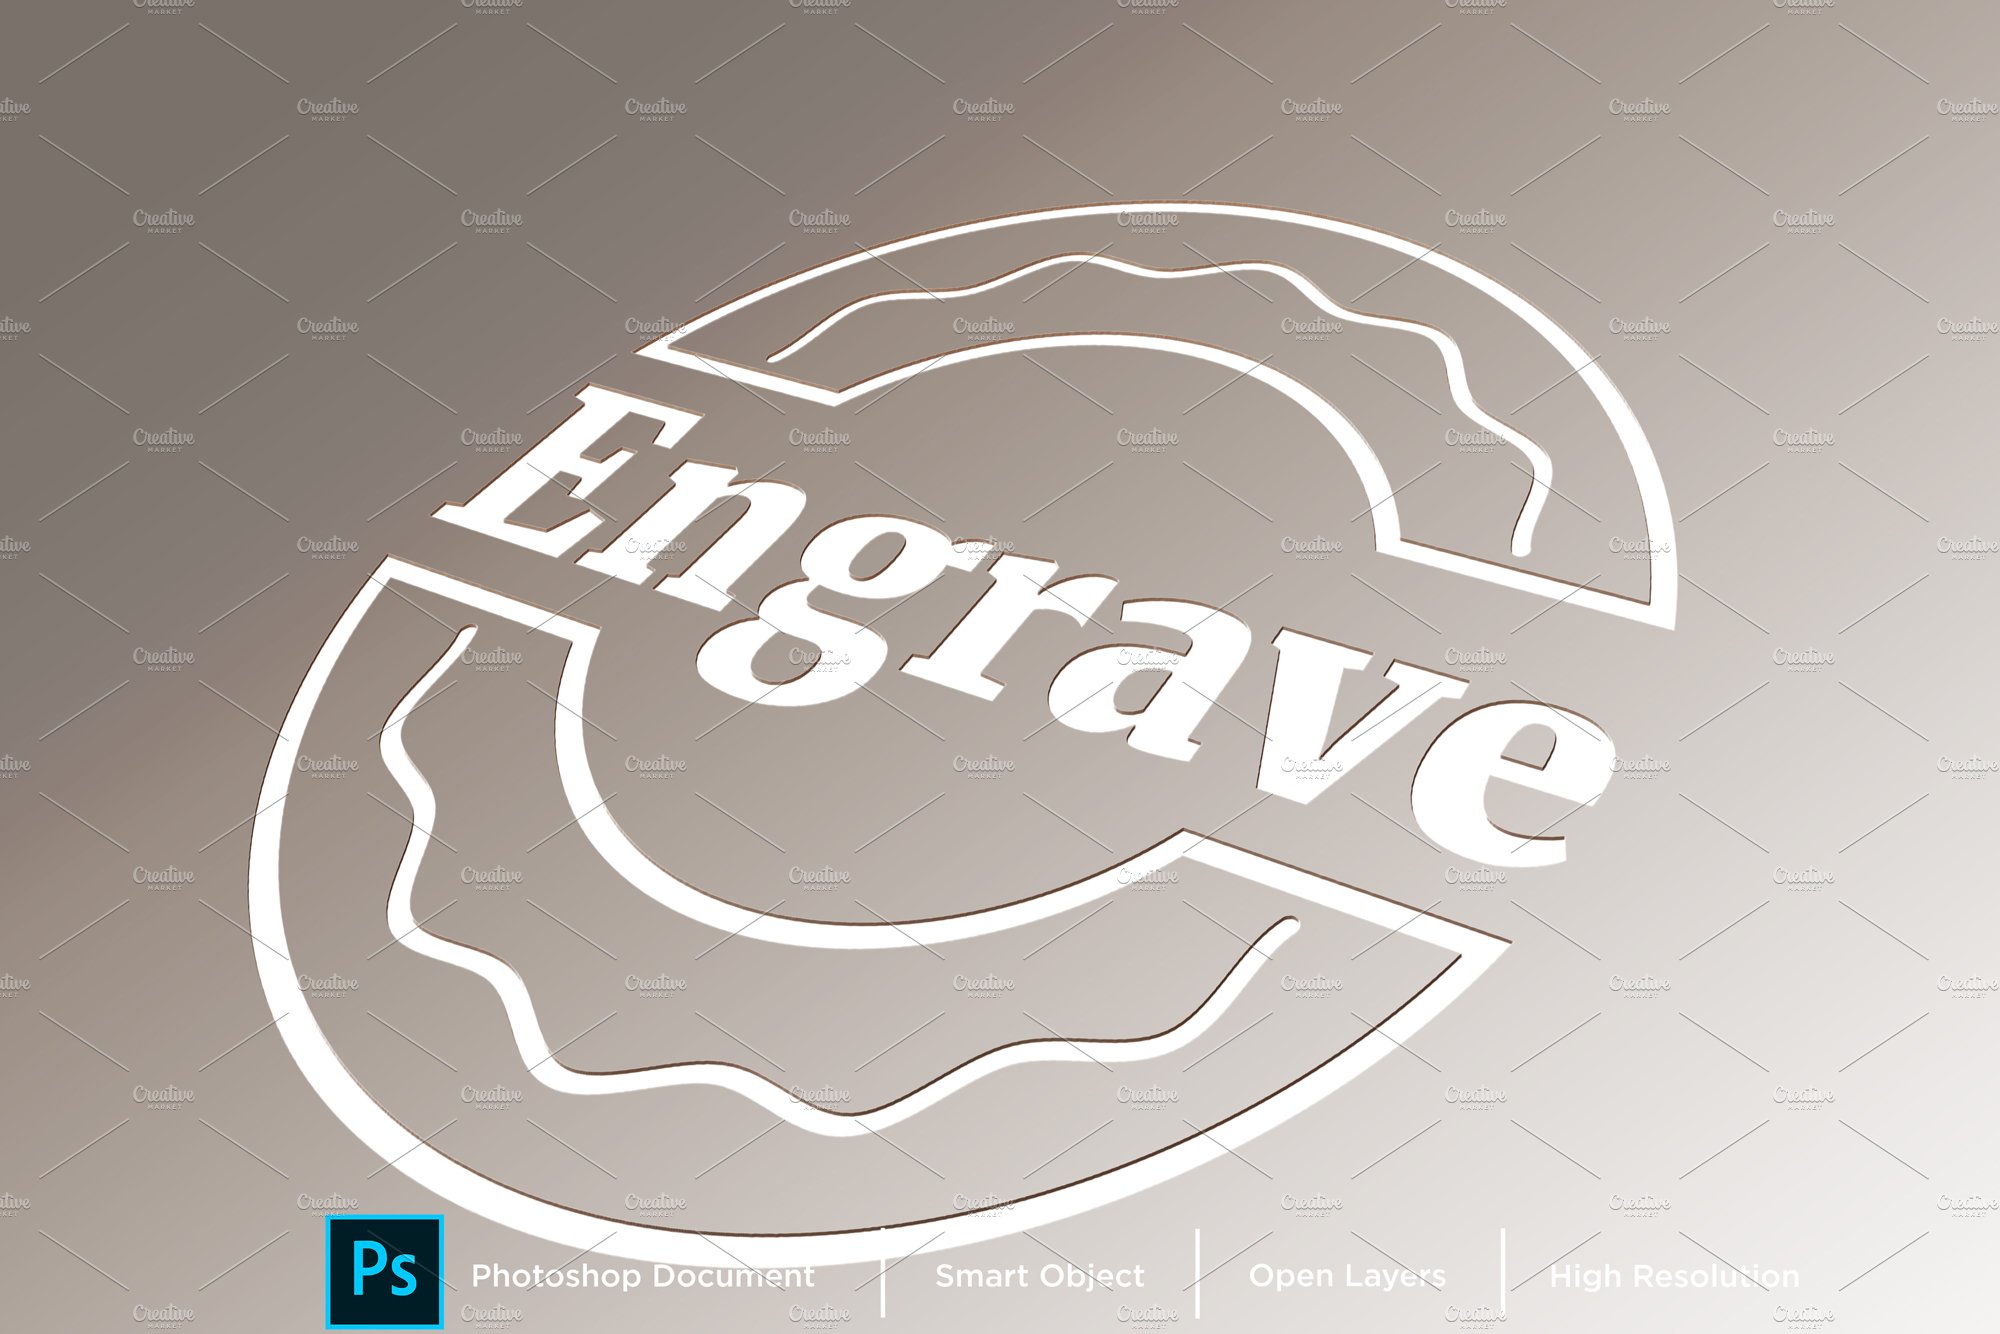 Engrave Text Effect & Layer Stylepreview image.